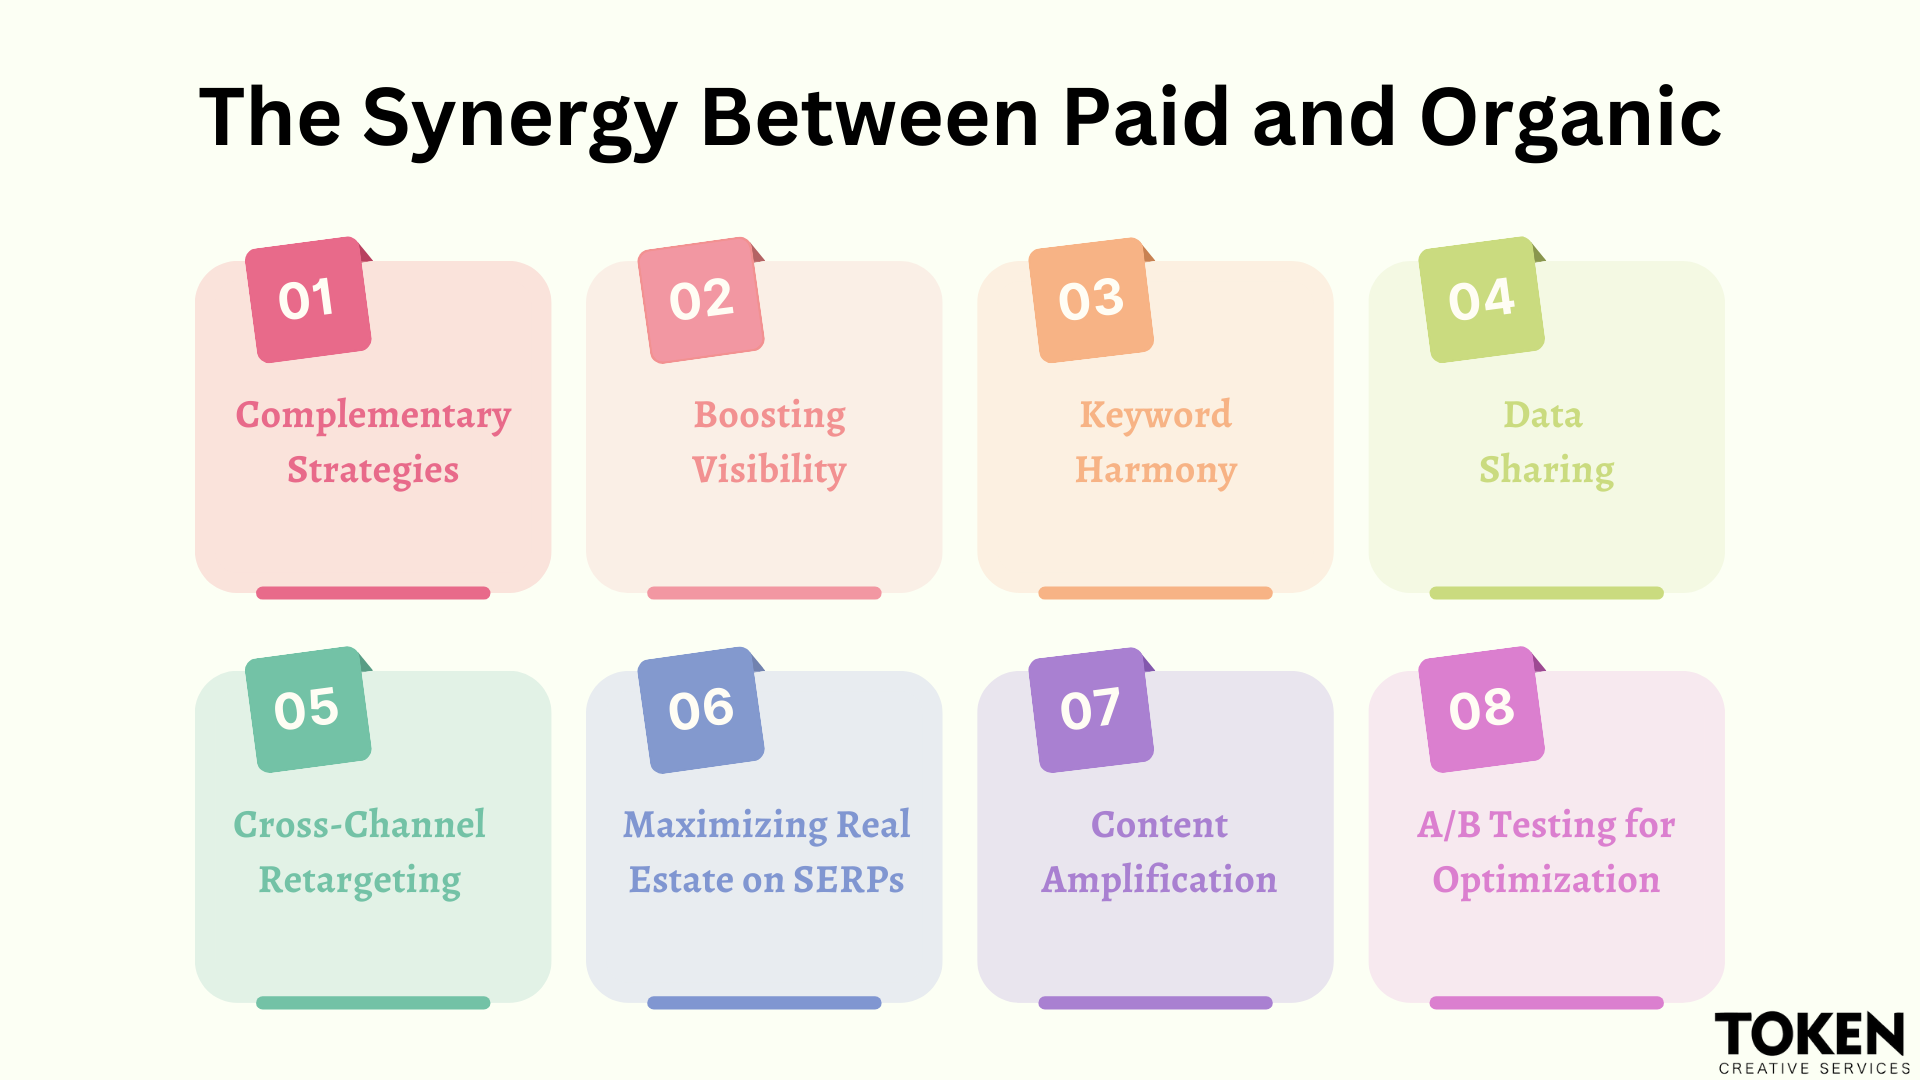 The Synergy Between Paid and Organic